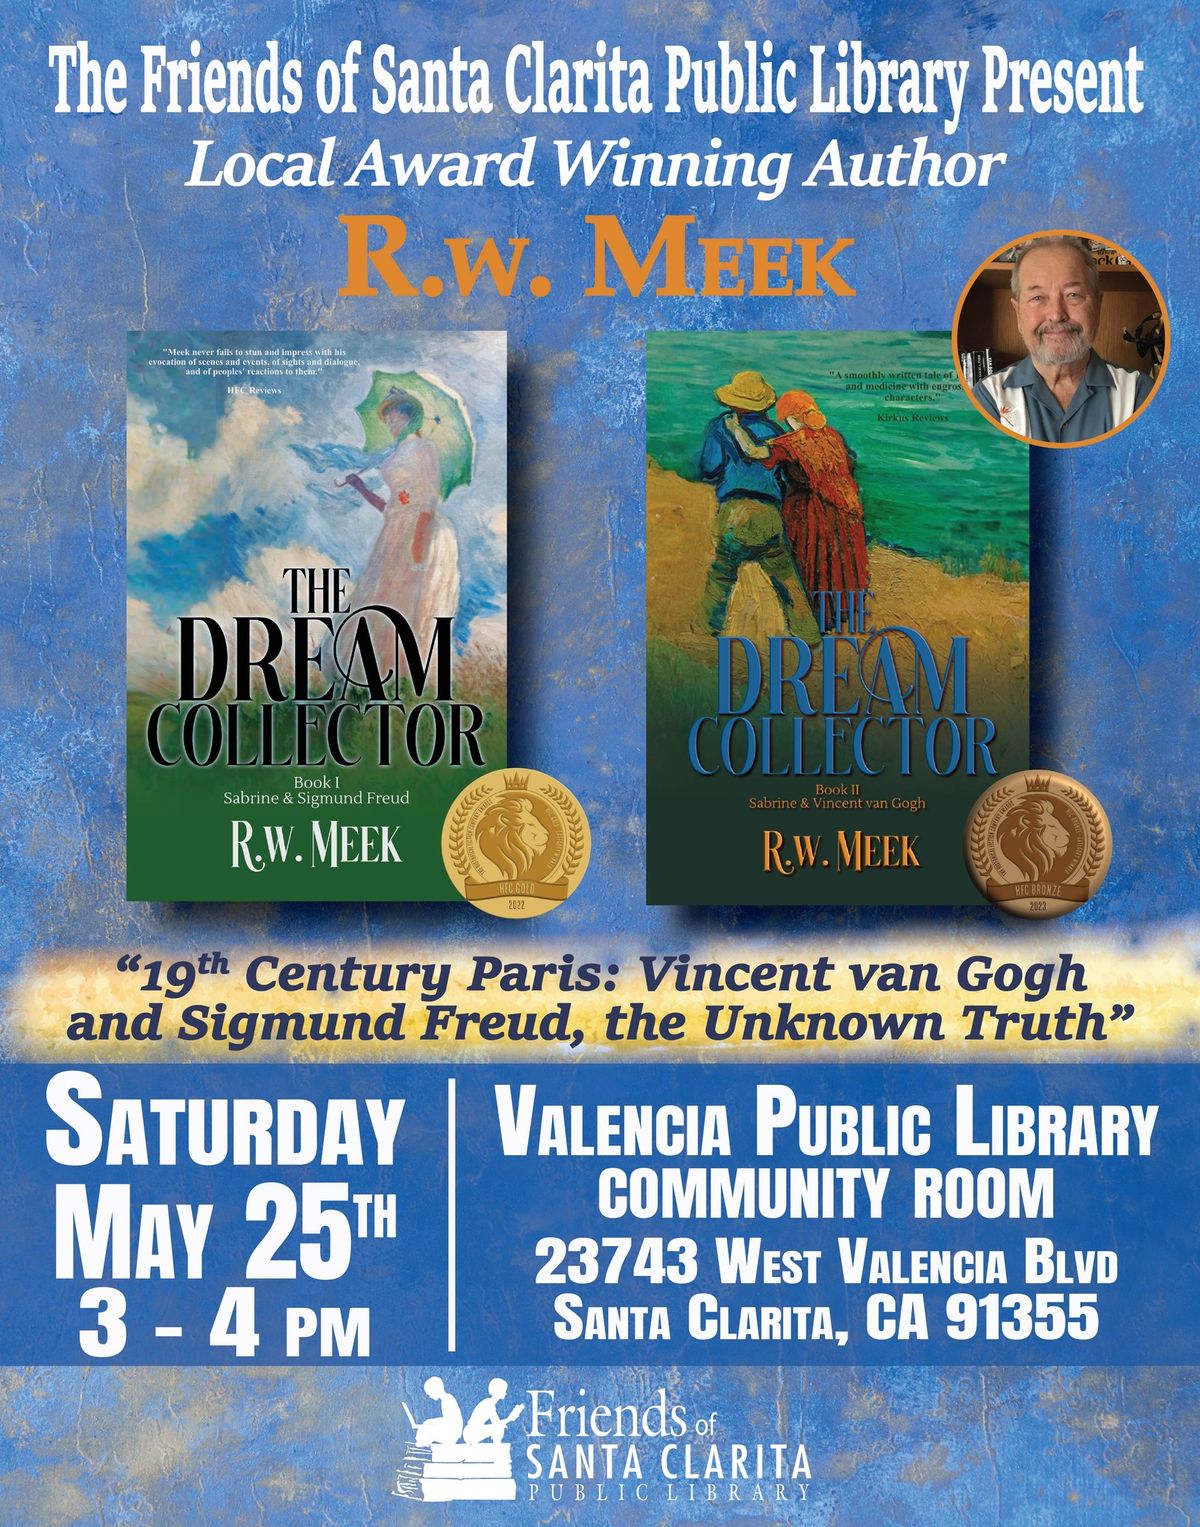 R. w. Meek Author Event